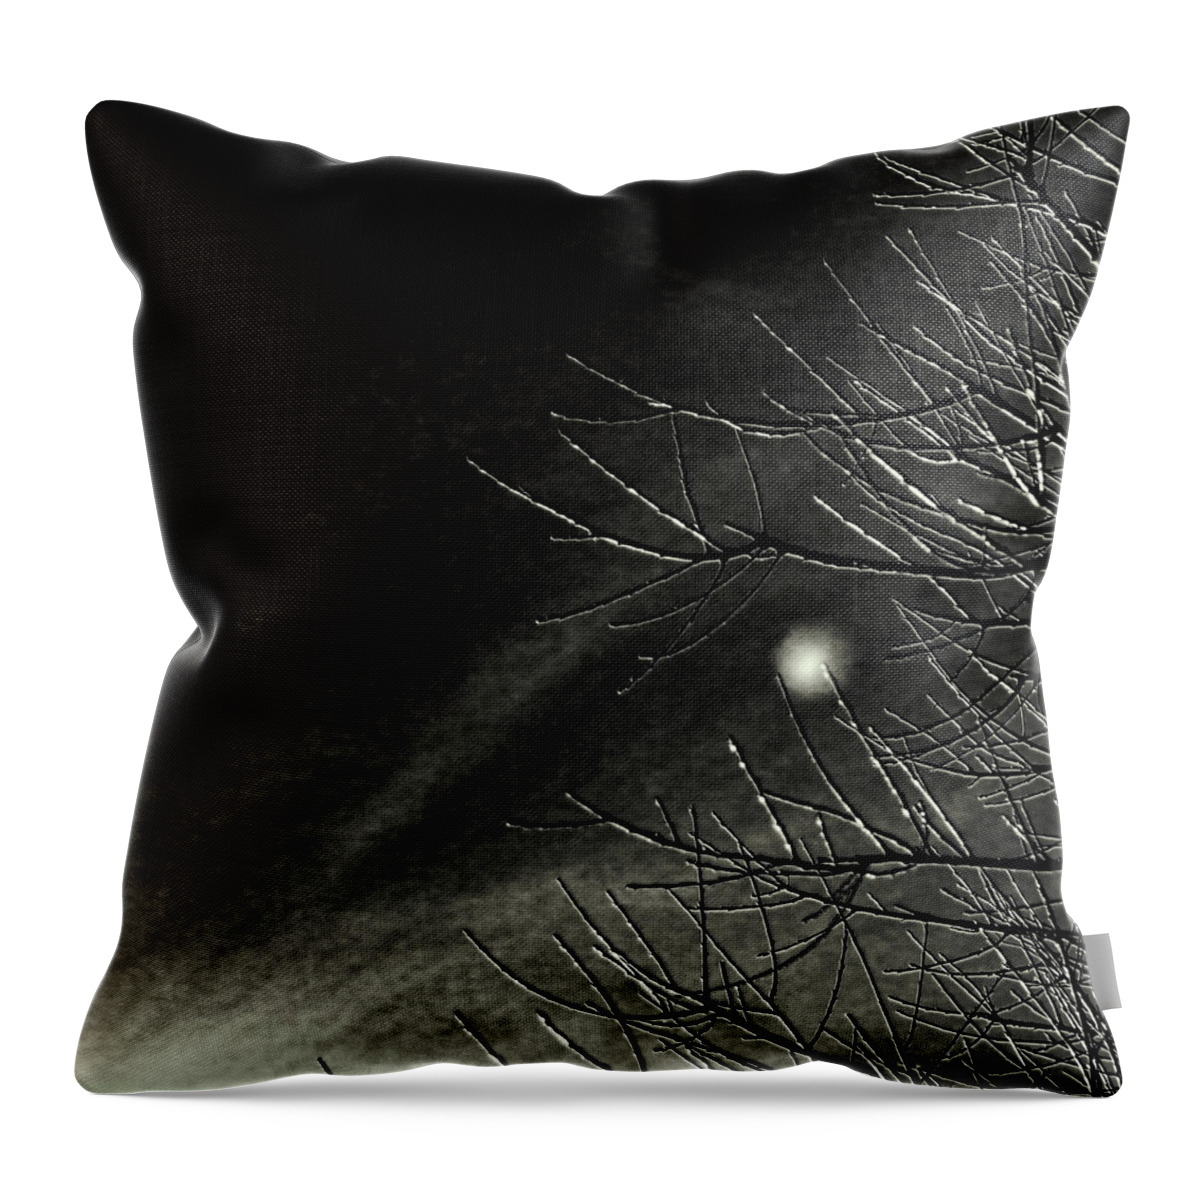 Infrared Throw Pillow featuring the photograph Branching Out by Kate Hannon